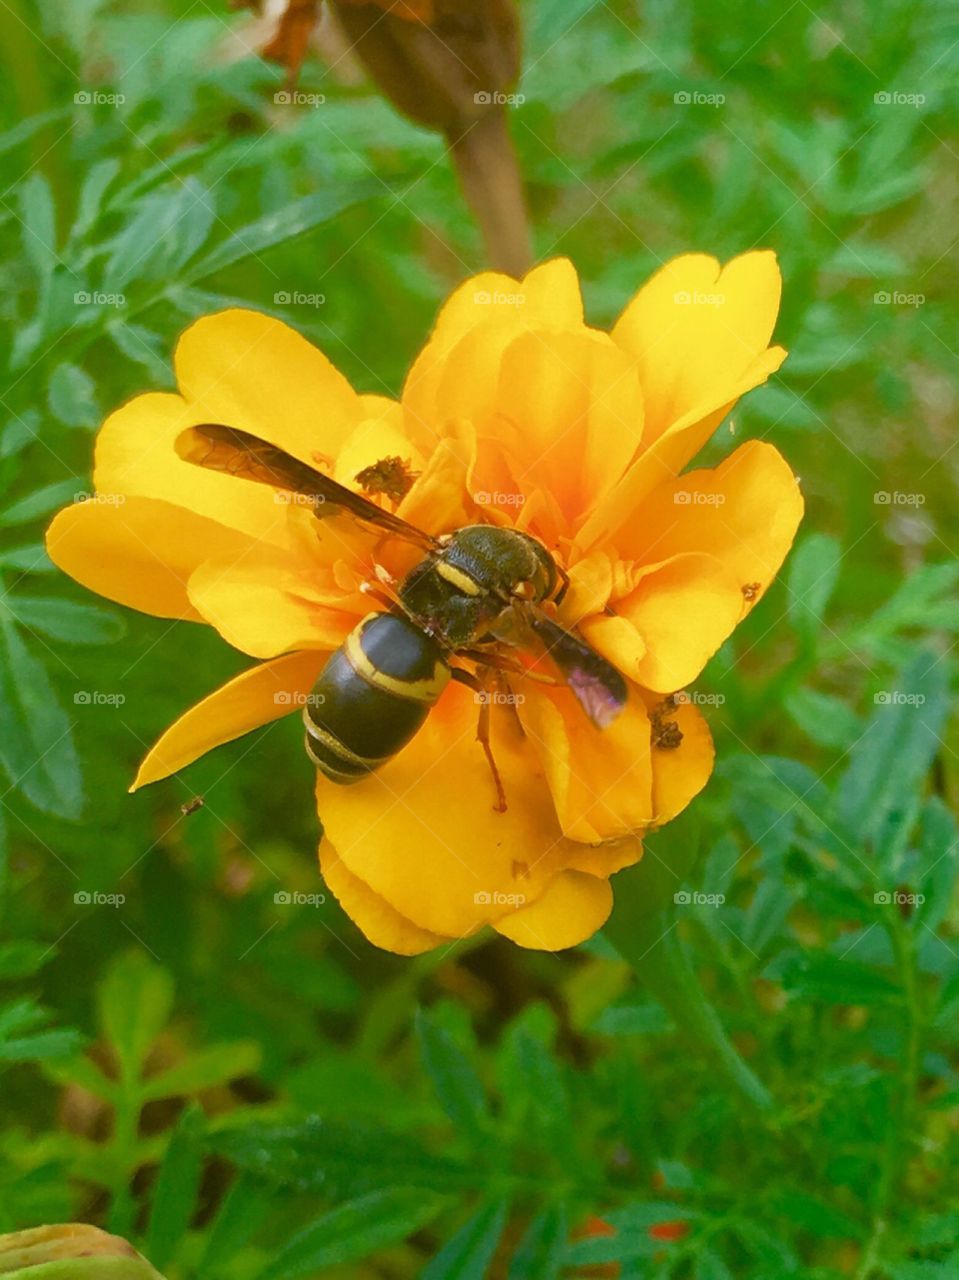 A bee working on a flower